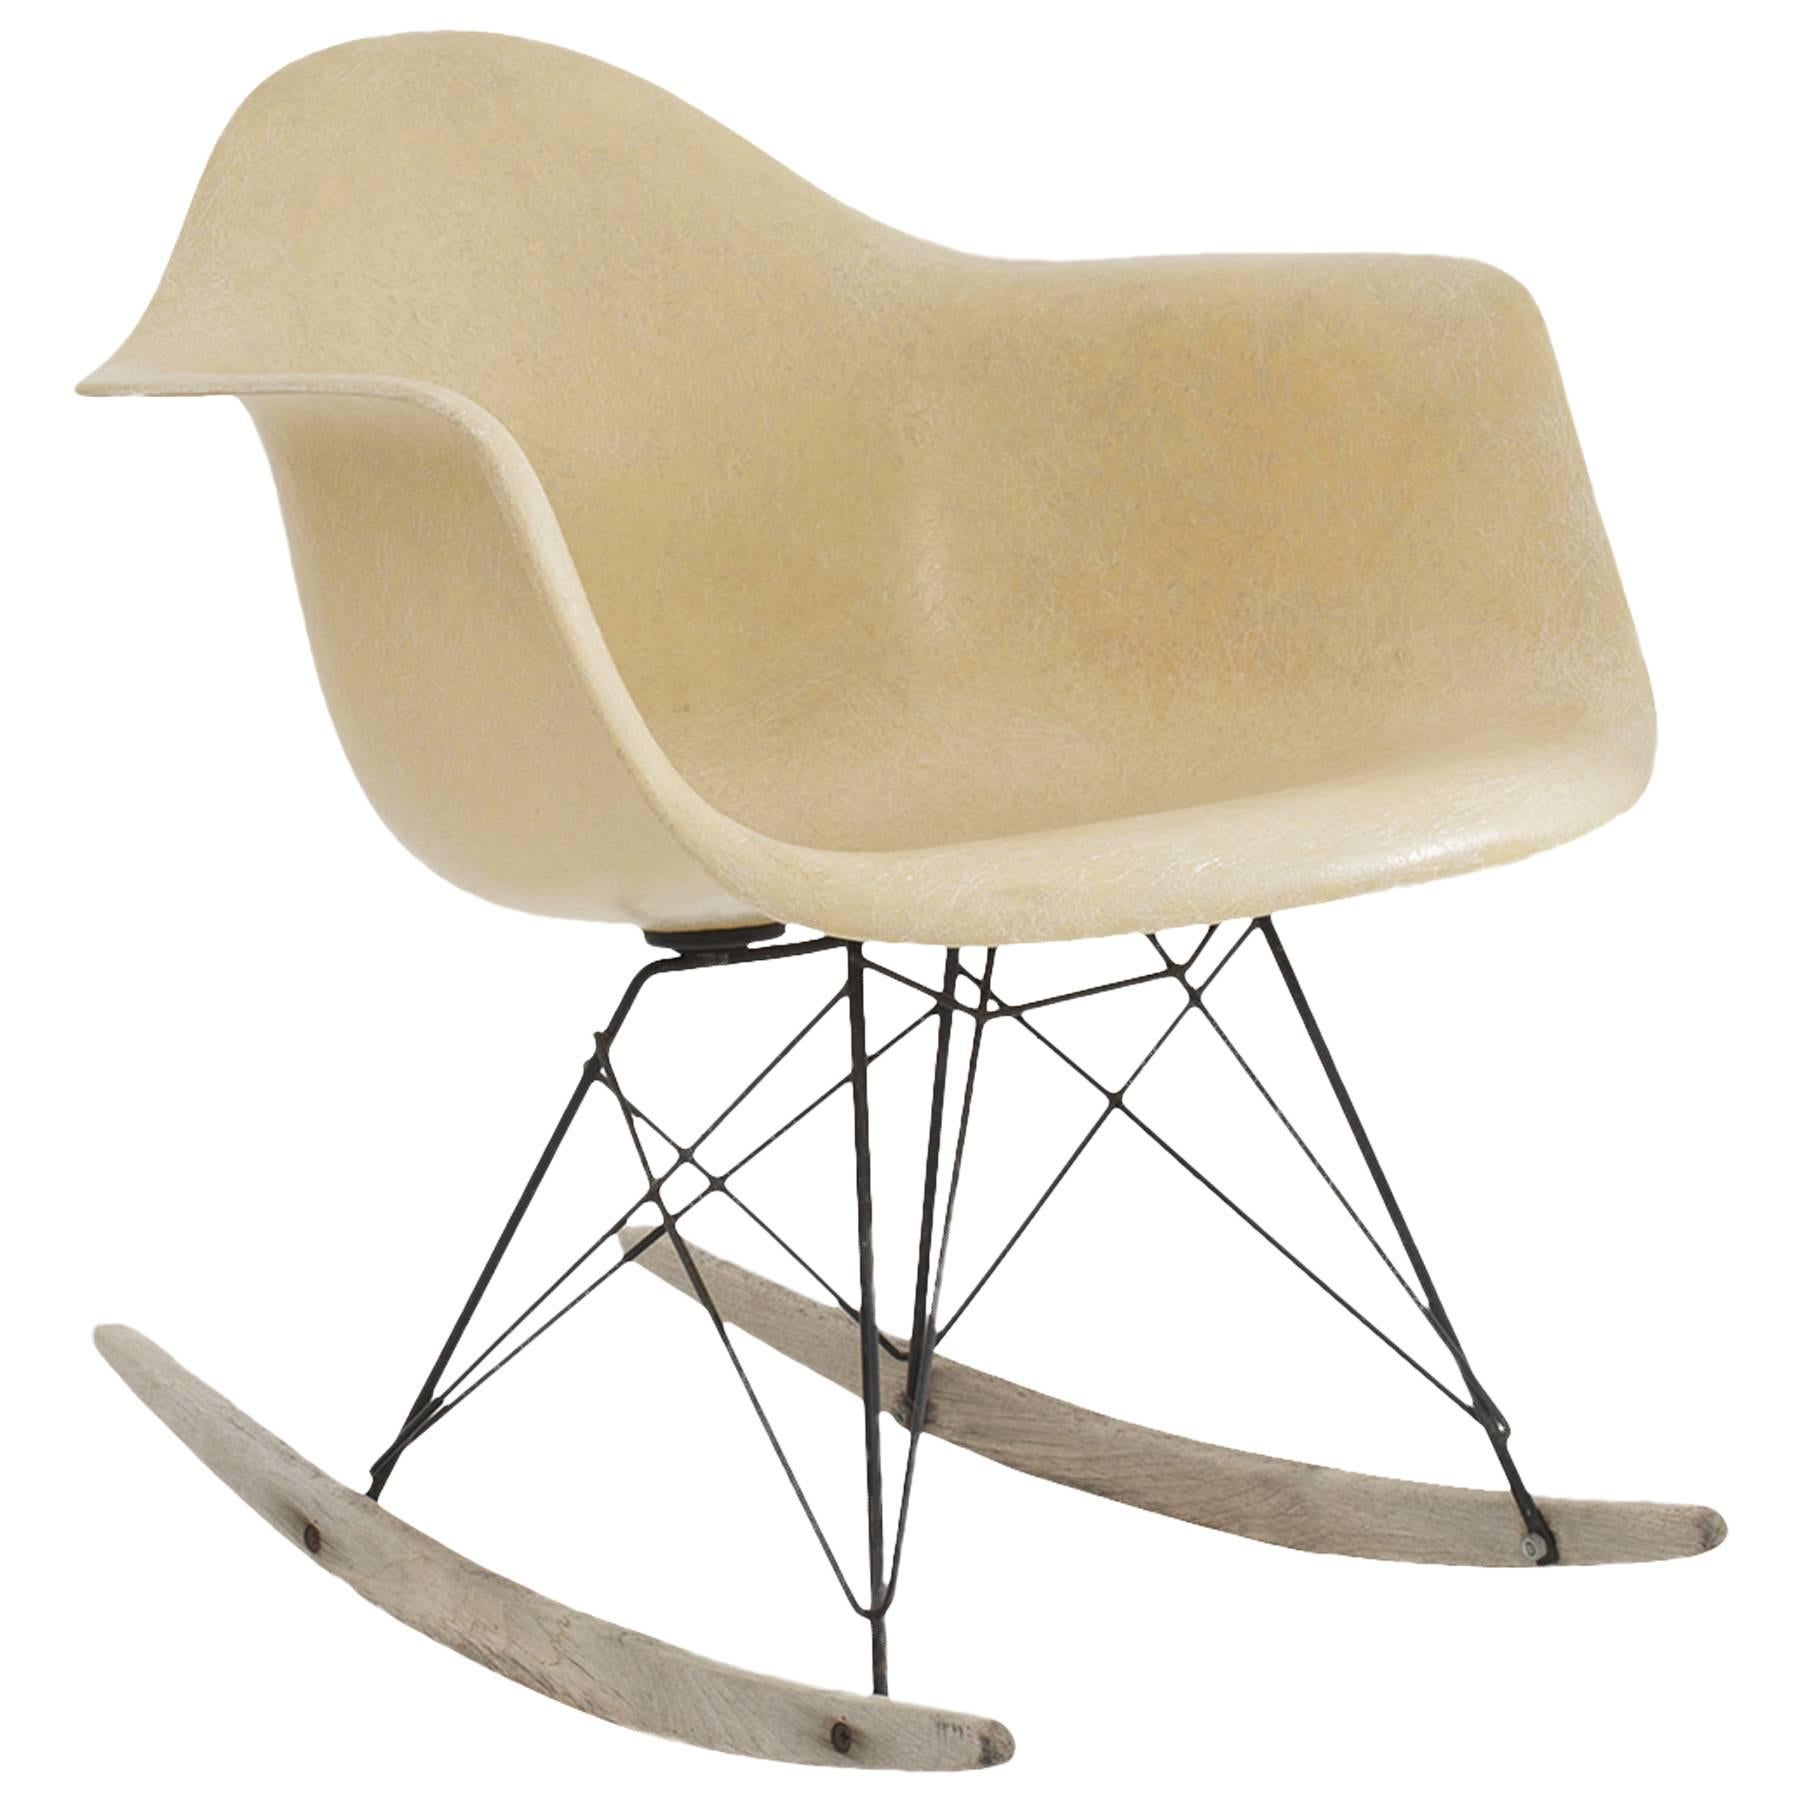 Early Production Eames Herman Miller RAR Rocking Chair